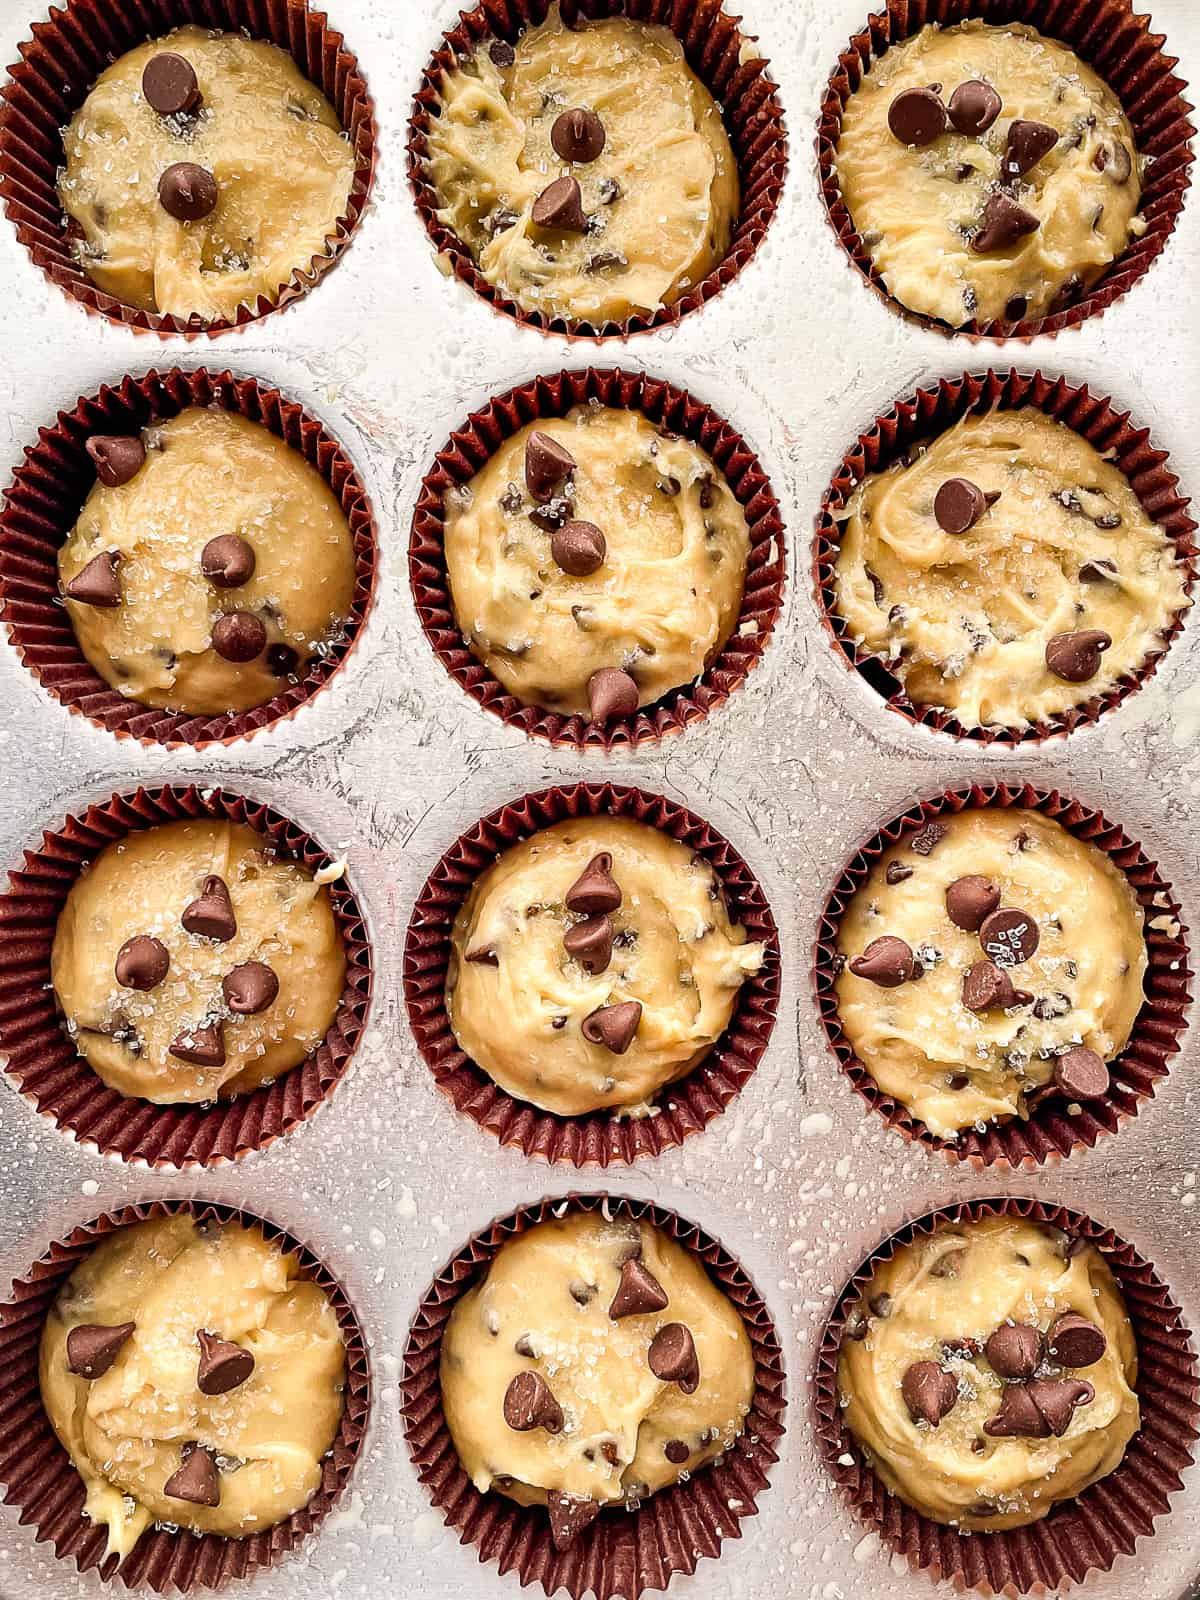 Gluten-free chocolate chip muffin batter in a pan.